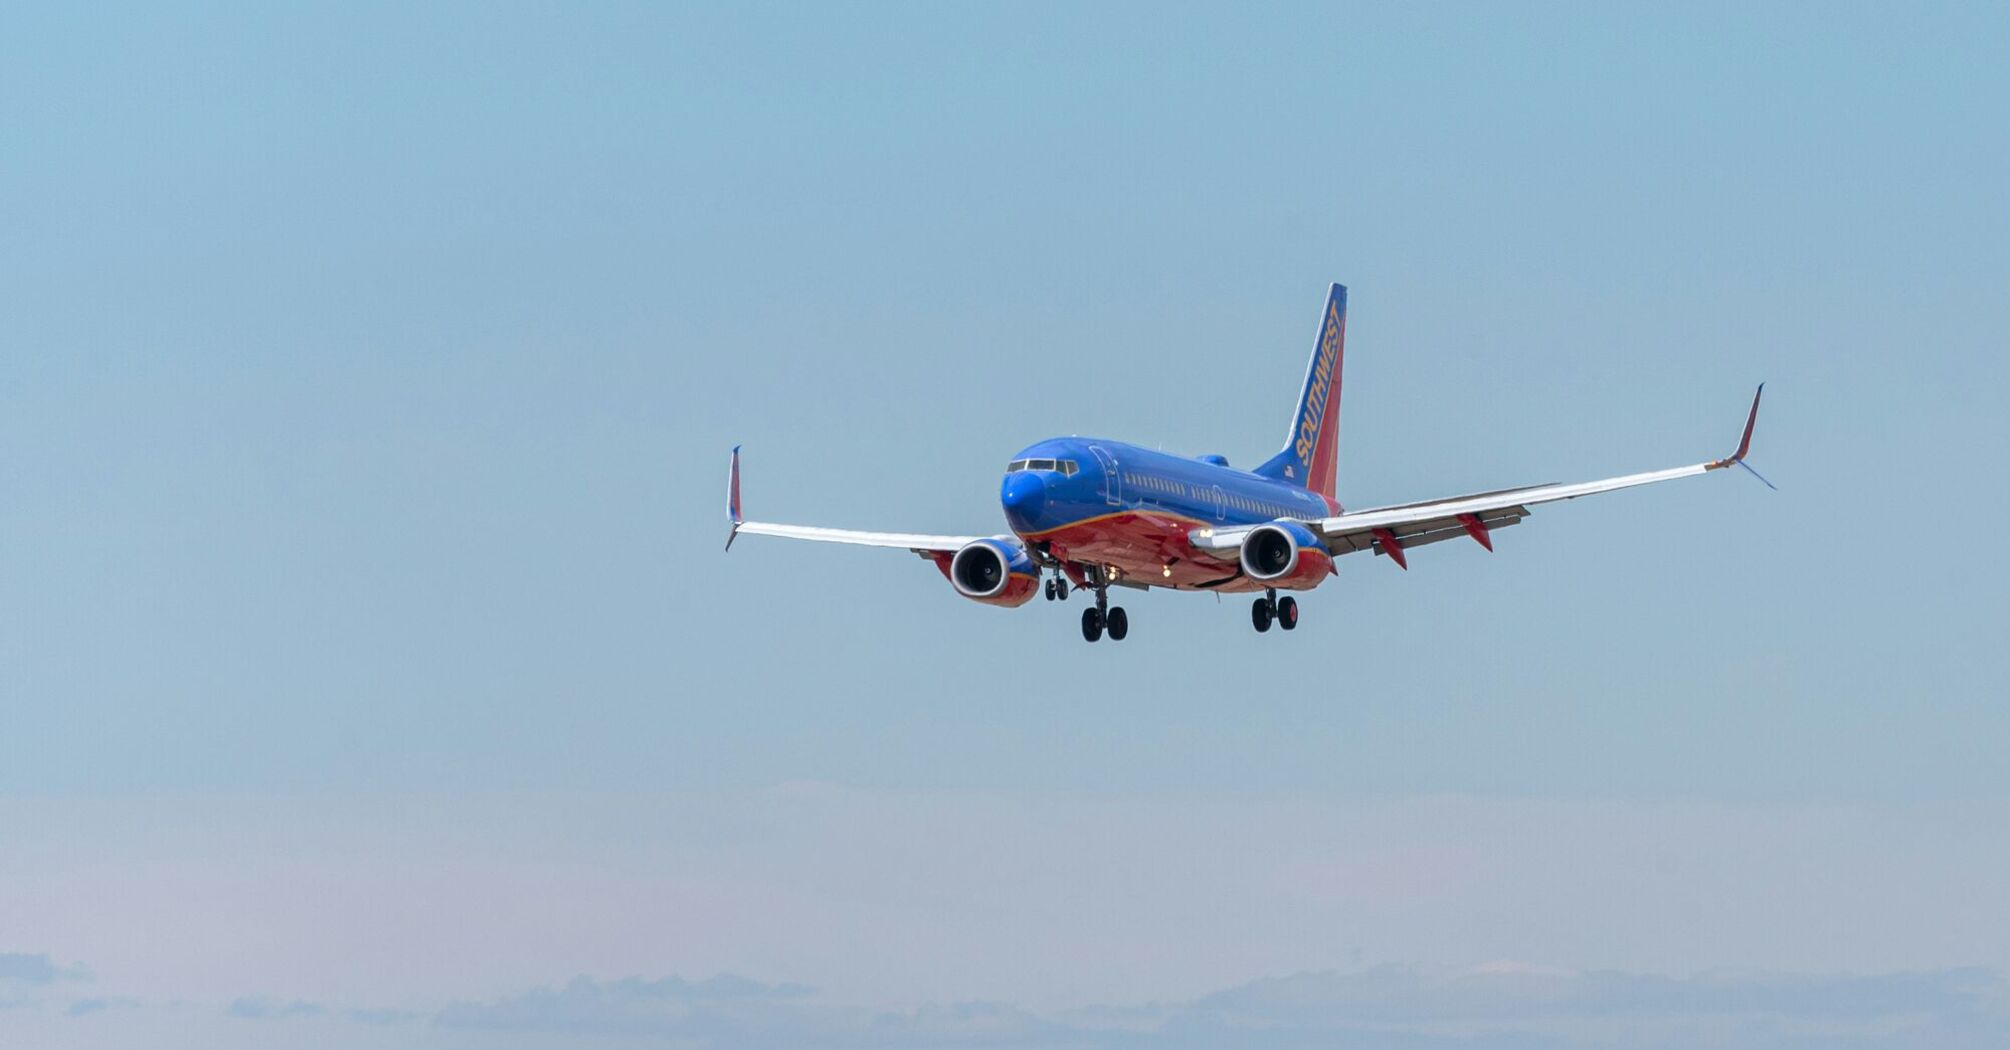 Blue and red passenger plane flying during daytime